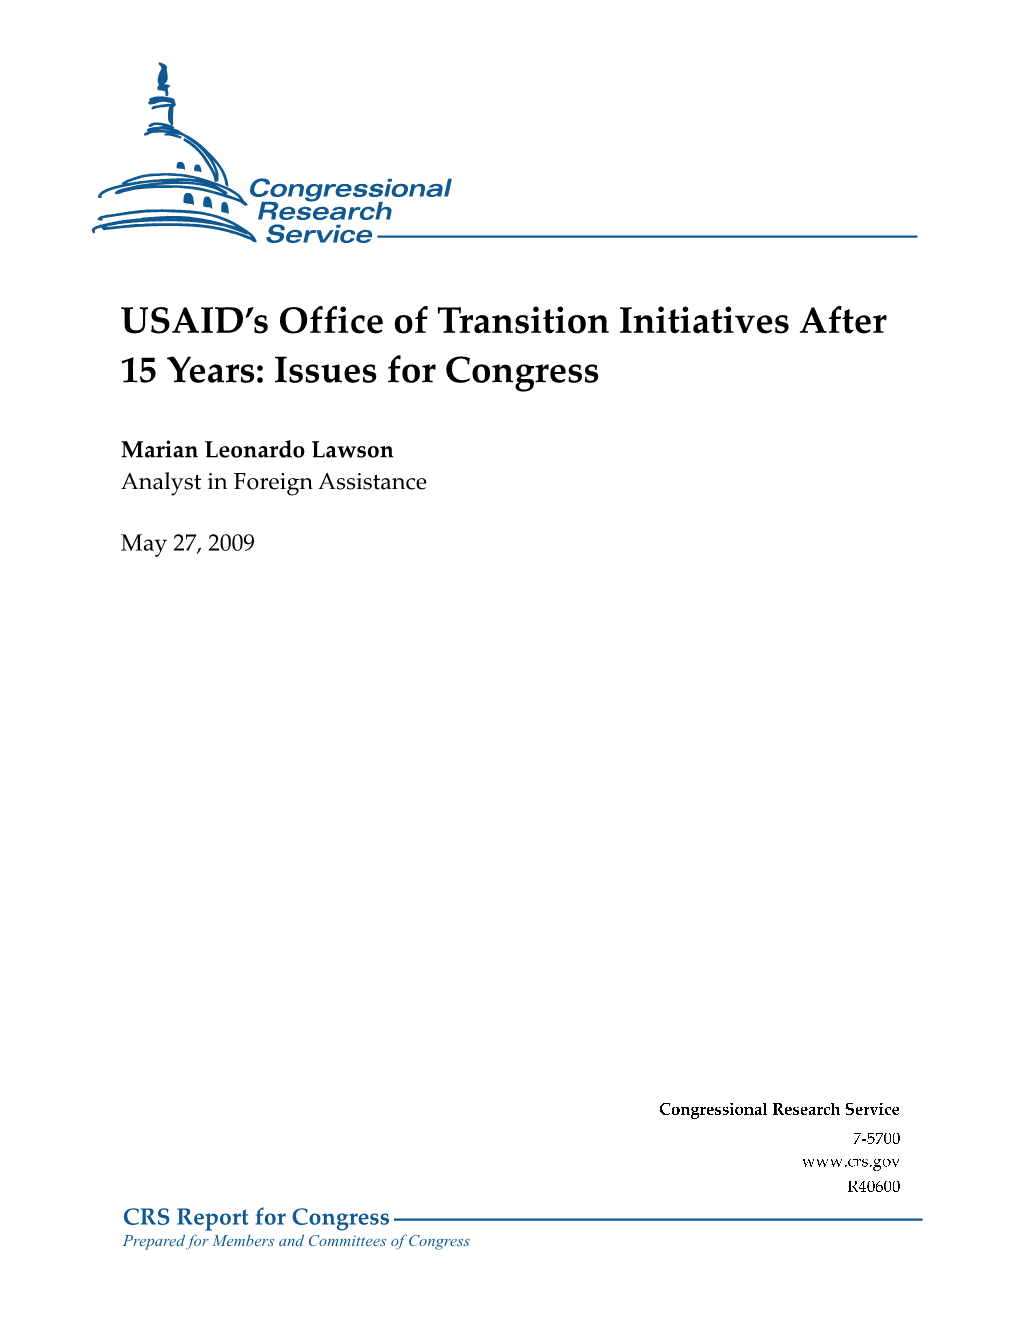 USAID's Office of Transition Initiatives After 15 Years: Issues for Congress